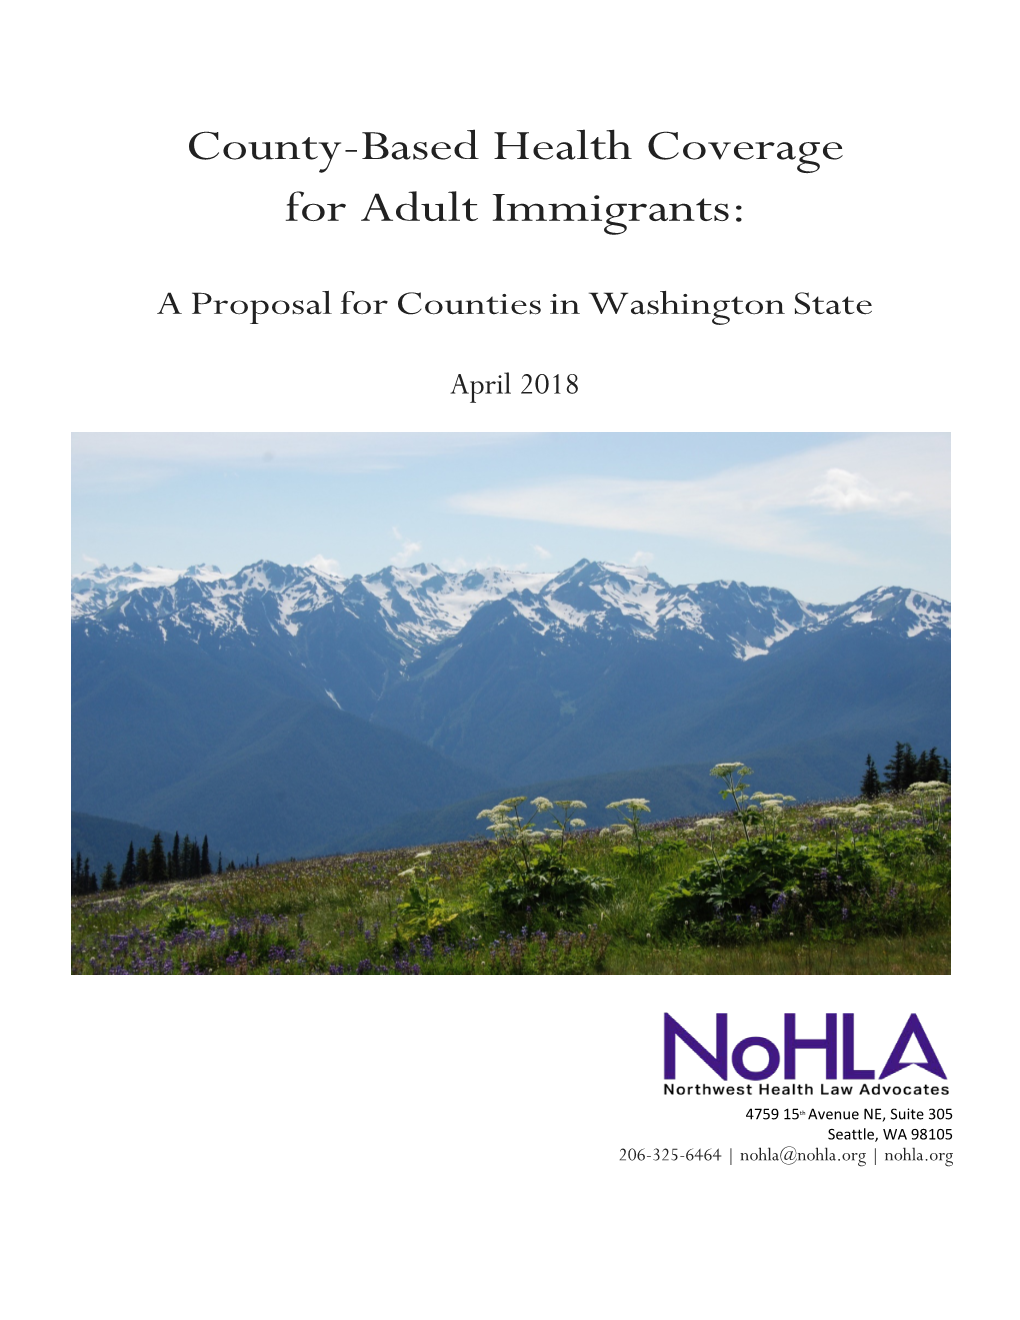 County-Based Health Coverage for Adult Immigrants